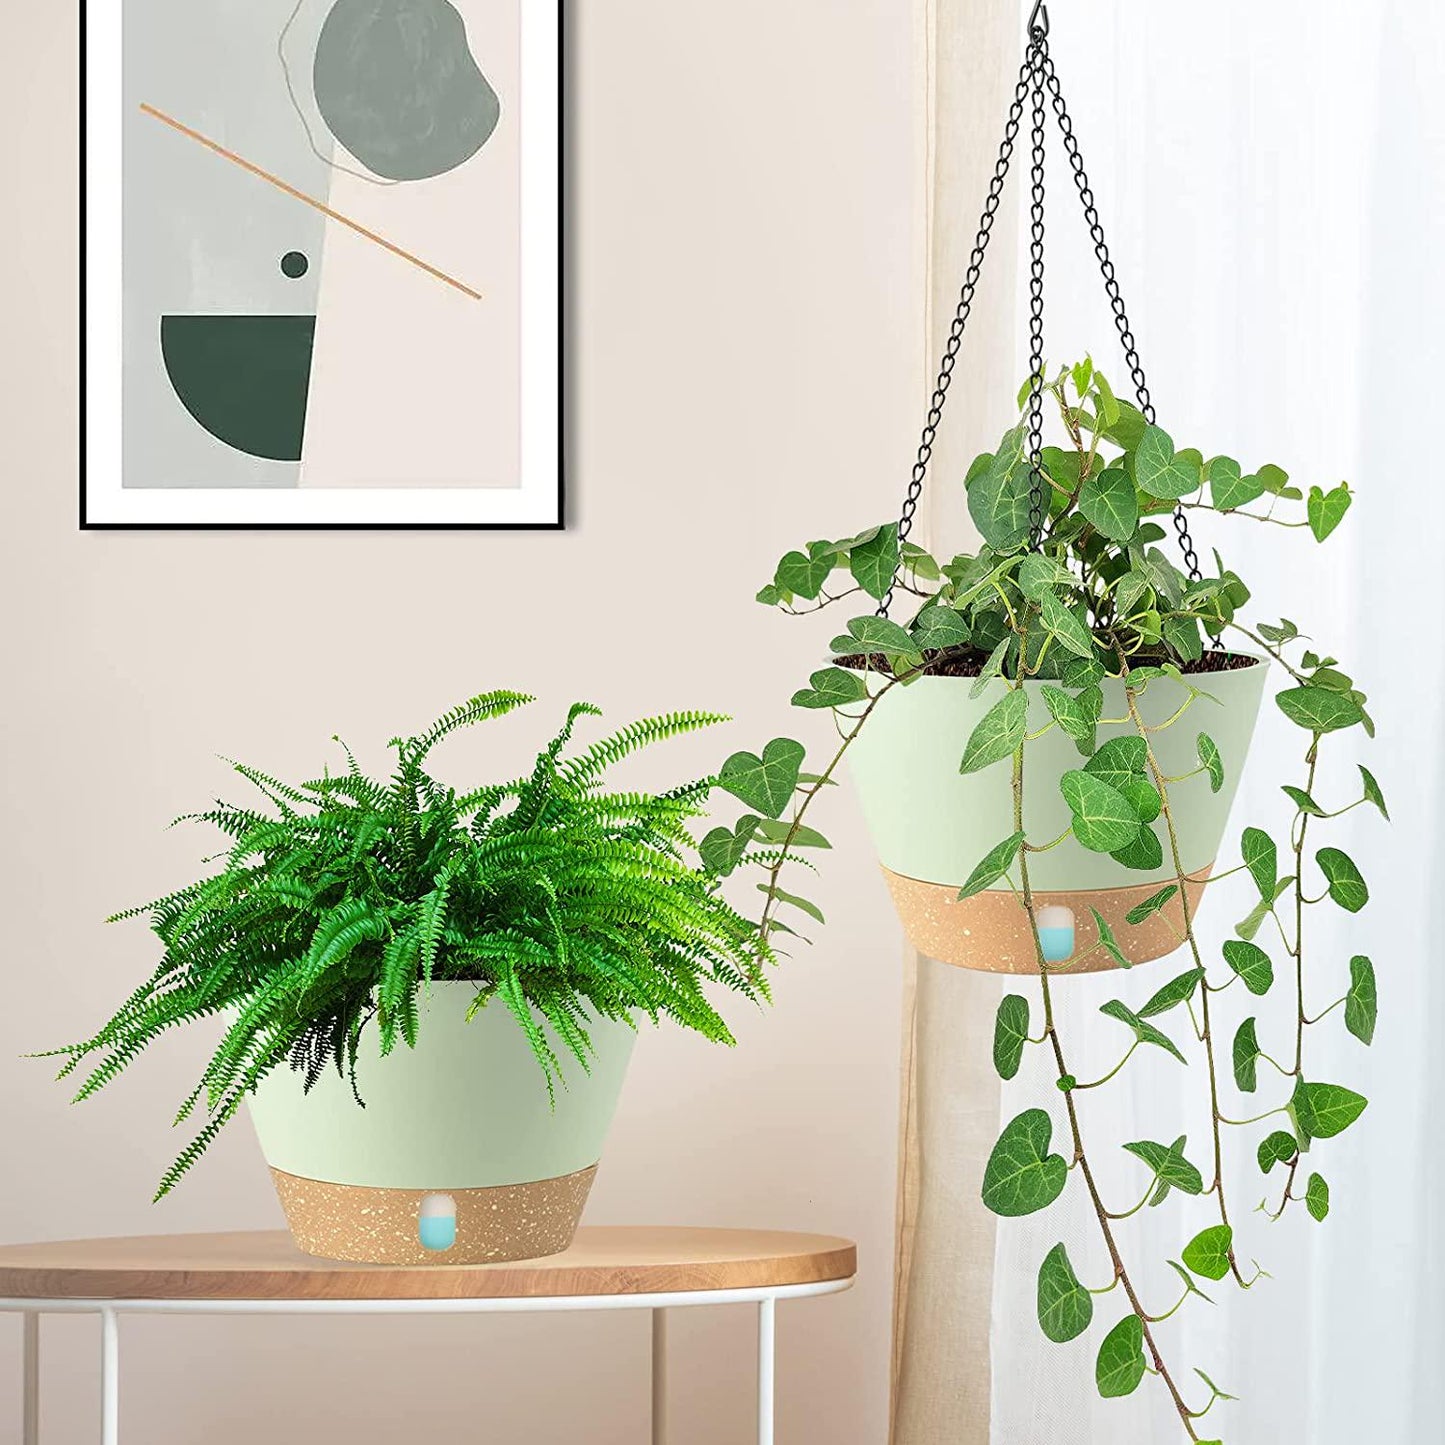 DEMACIYA Hanging Planters for Indoor Plants, 8 Inch Hanging Basket Plant Pots with 3 Hooks Modern Flower Pots Set of 2 with Drainage Hole and Tray for Home, Garden, Outdoor Décor